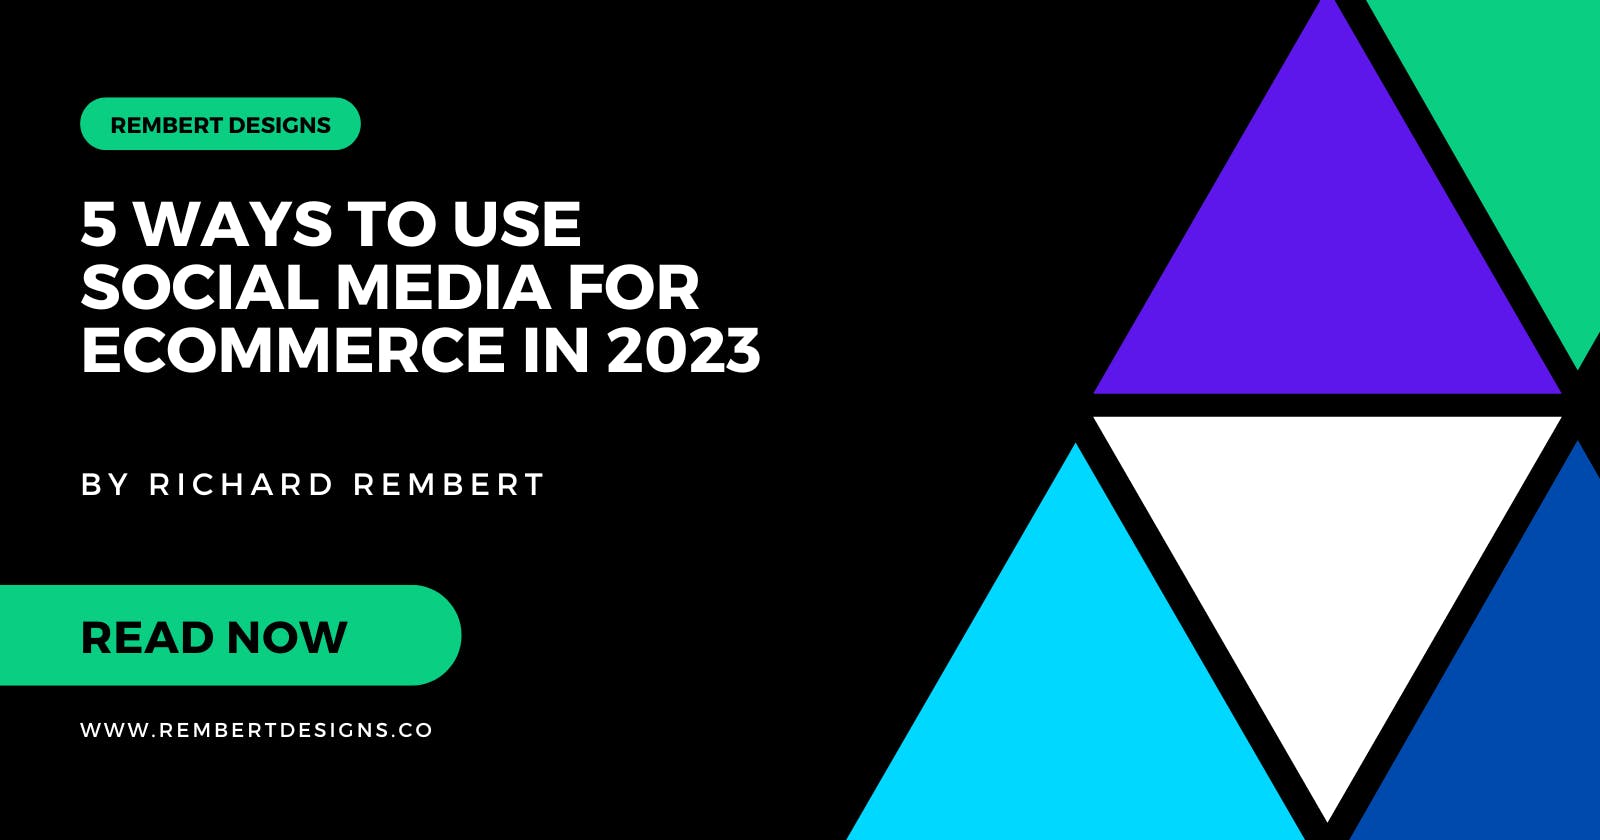 5 Ways to Use Social Media for Ecommerce in 2023